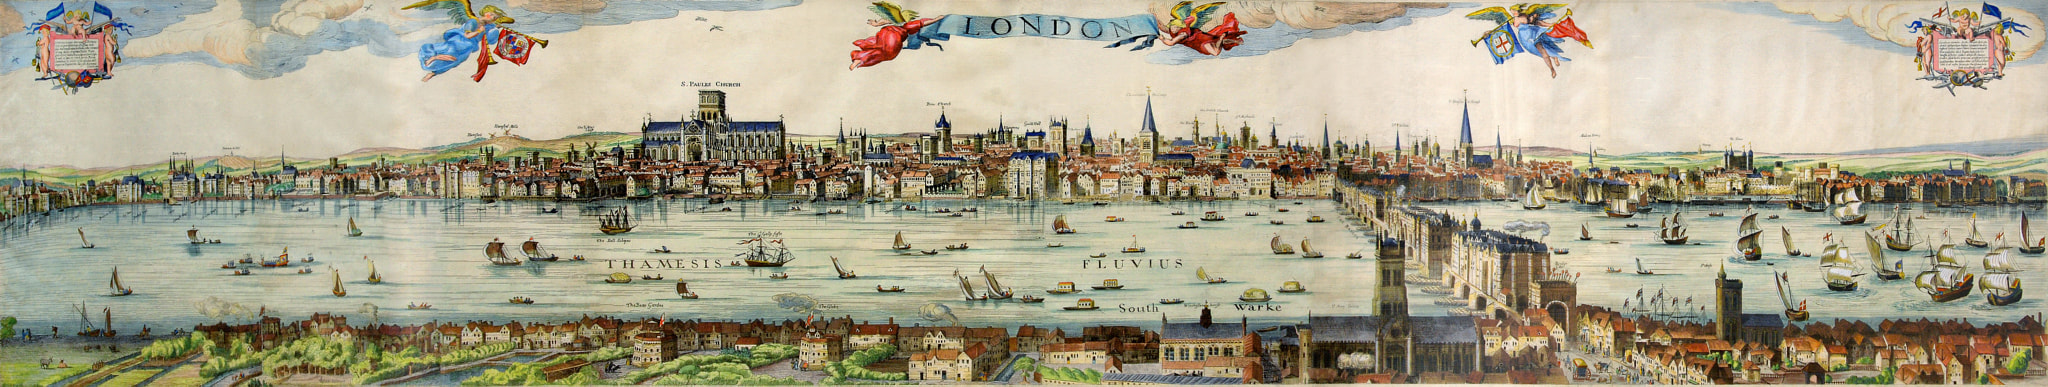 Nikon D80 sample photo. Visscher print of london and the river thames photography